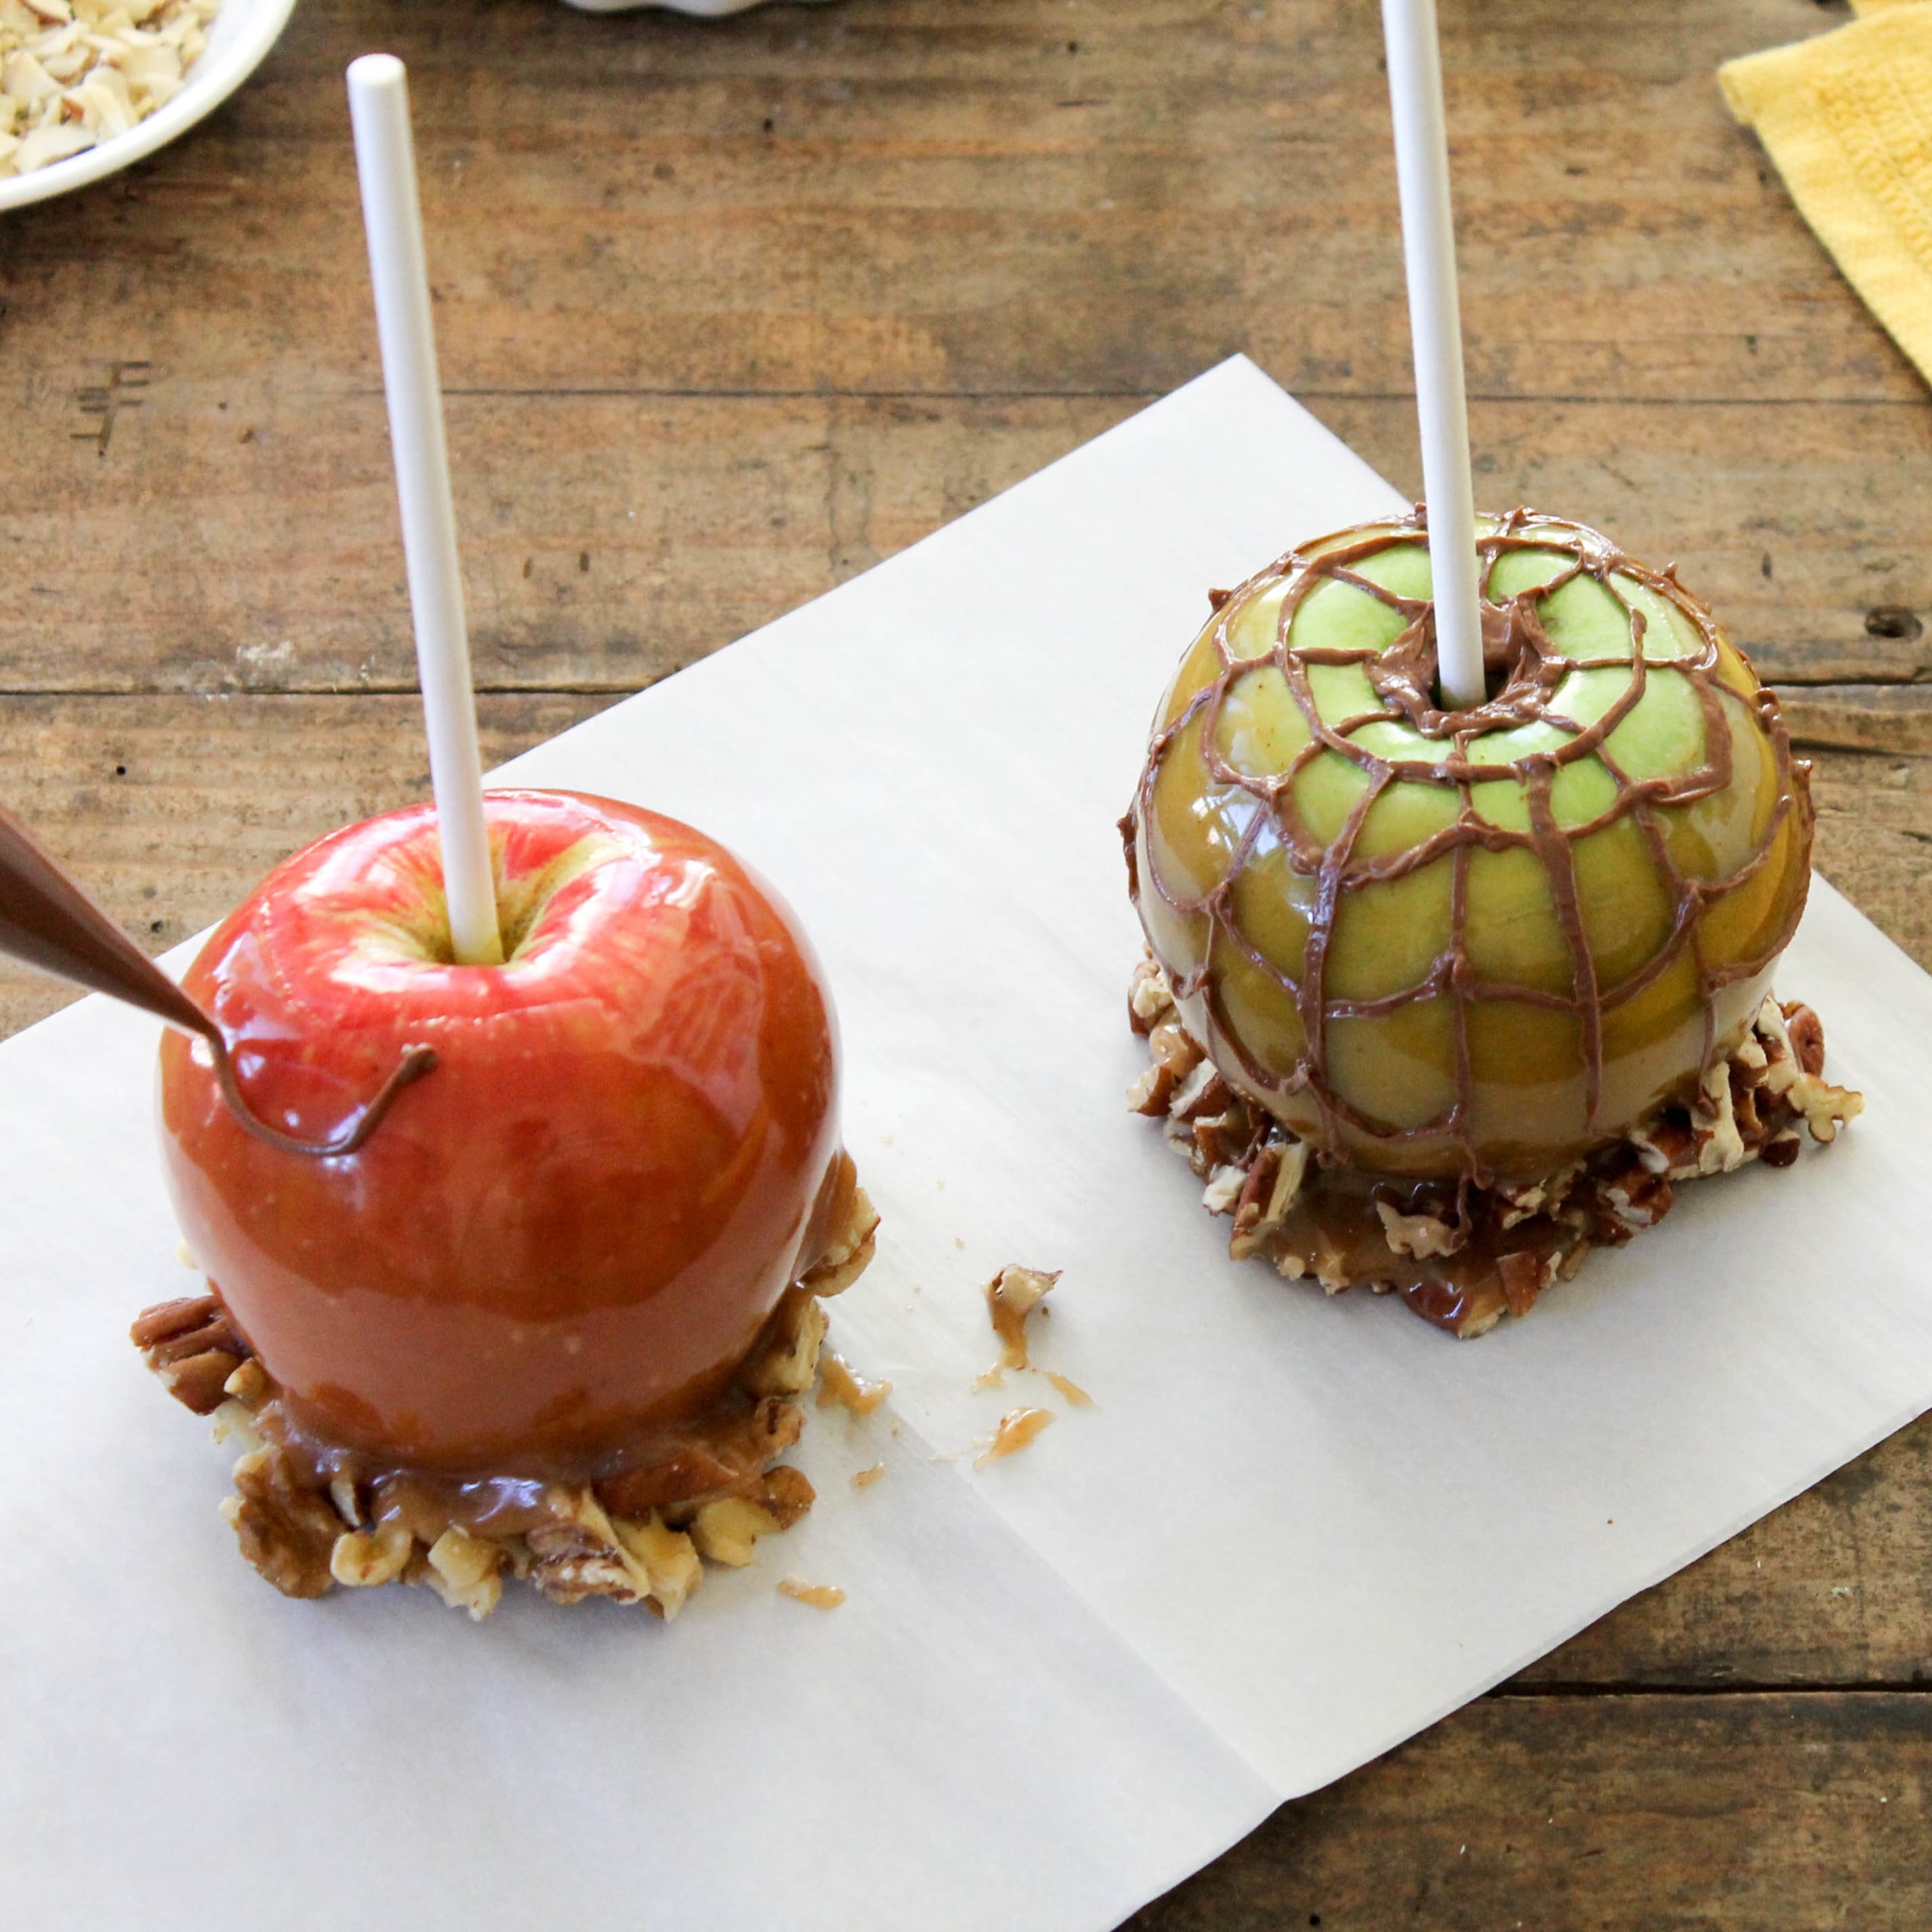 carmel-apples-with-spider-webs